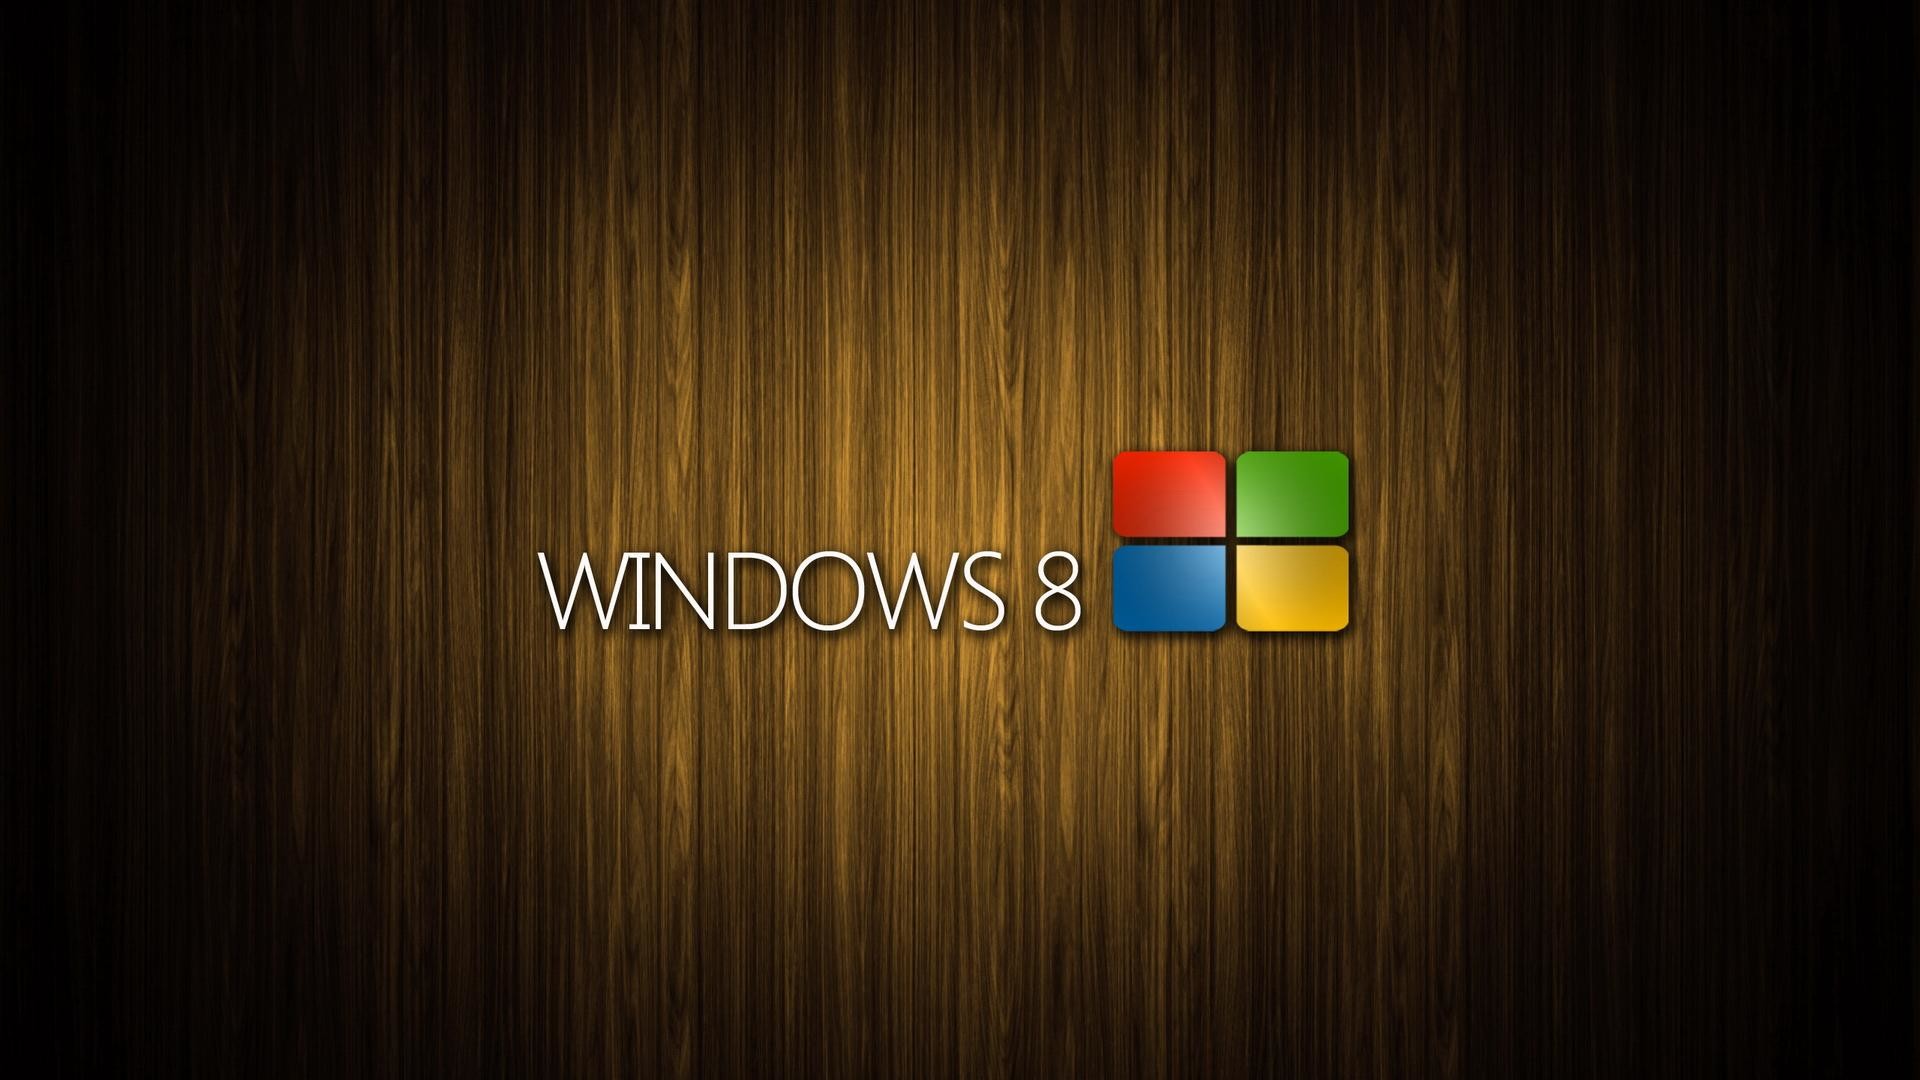 1920x1080  Windows 8 system woodiness backgrounds wide wallpapers :1280x800,1440x900,1680x1050 - hd